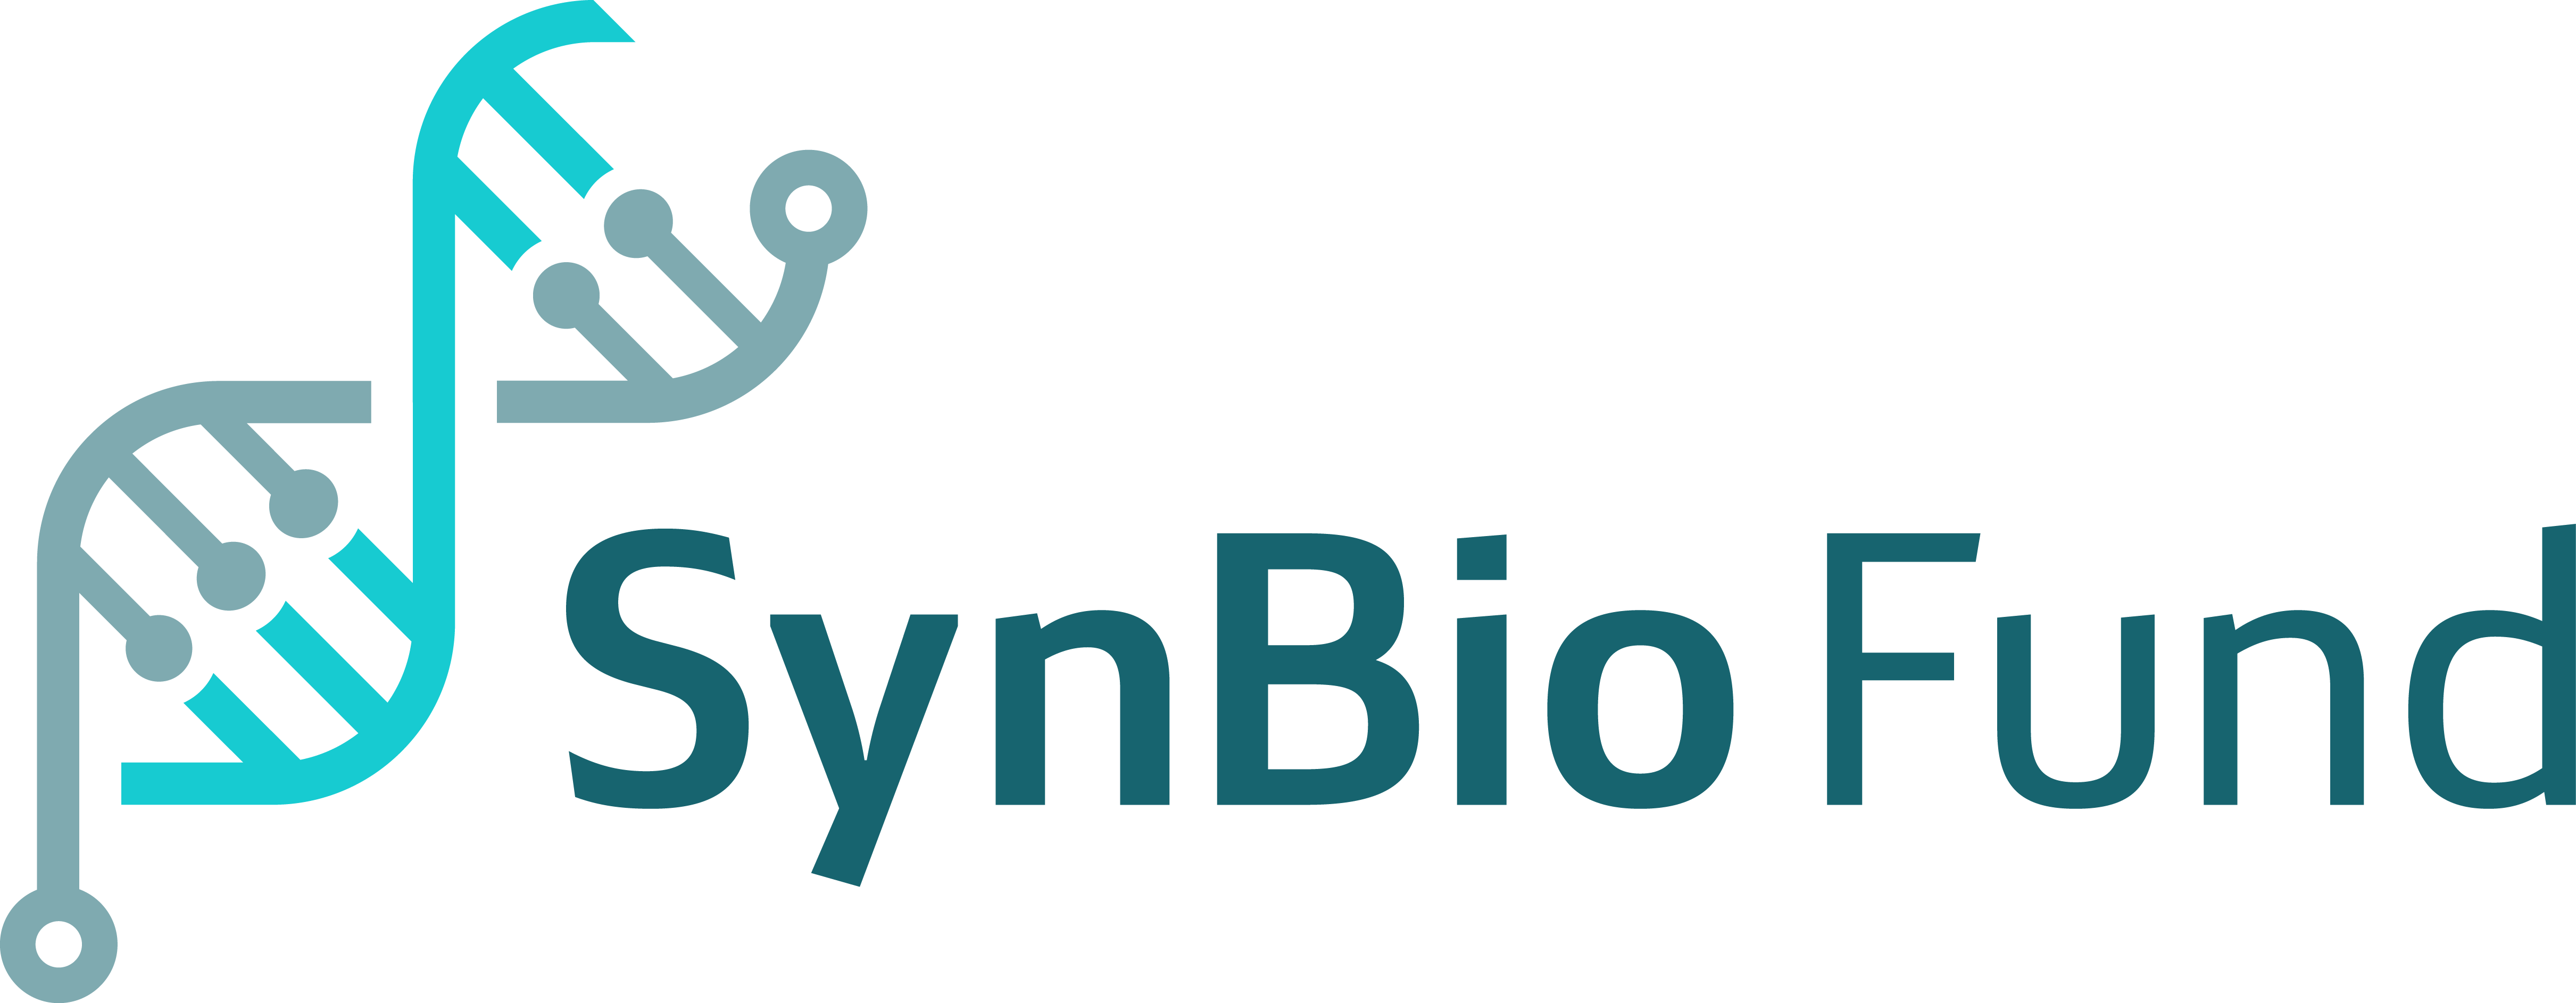 CamOptimus tool published - applying AI to synthetic biology